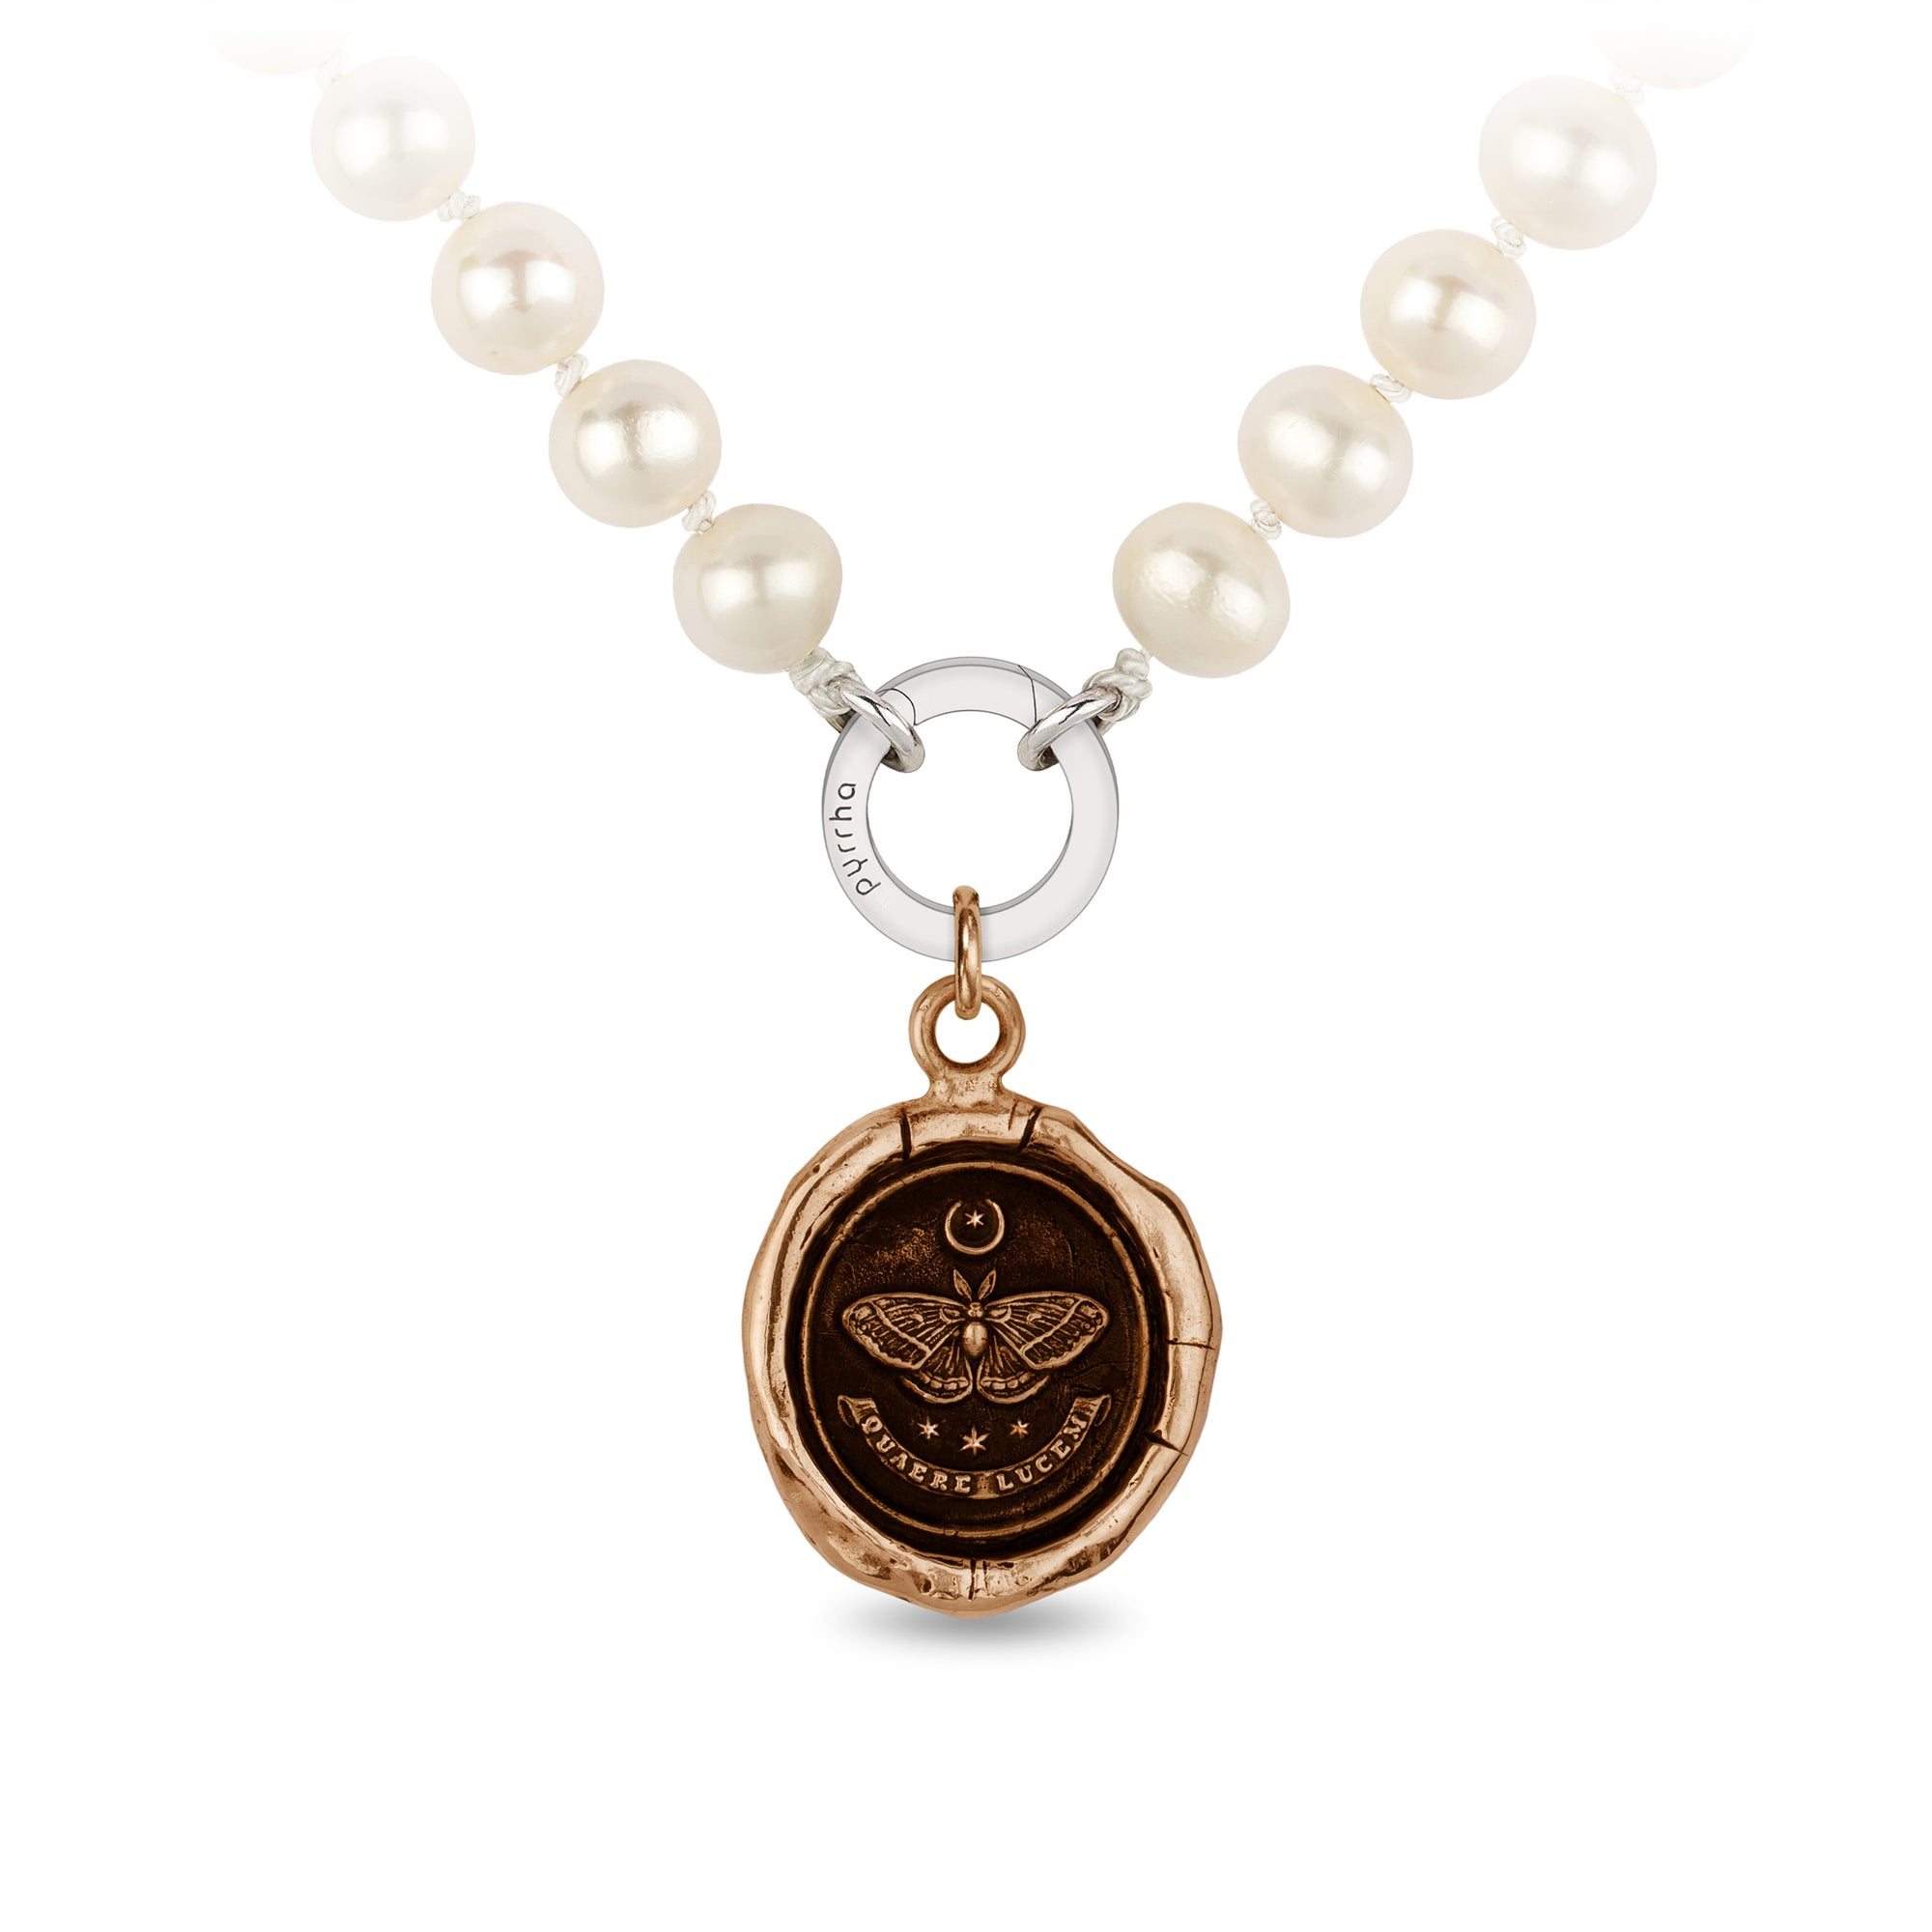 Seek The Light Knotted Freshwater Pearl Necklace